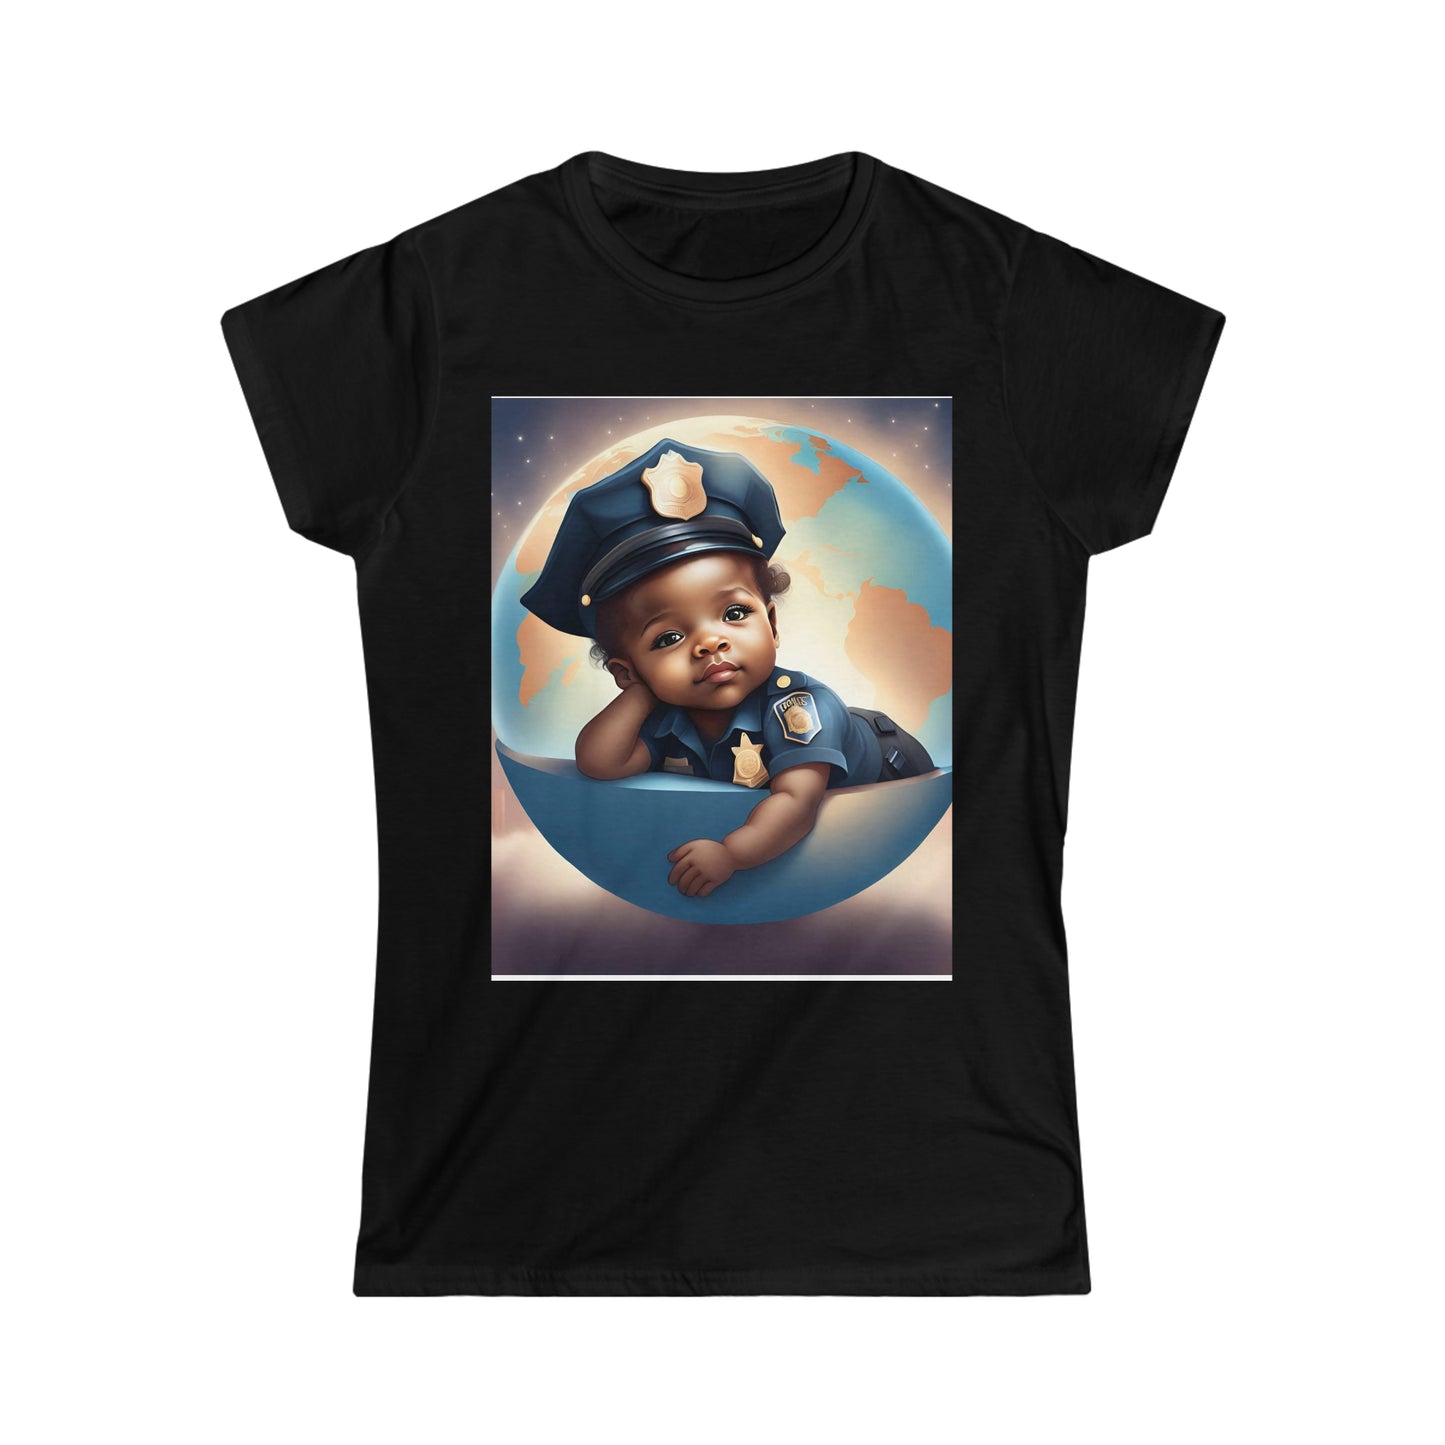 The World is Yours Police Tee